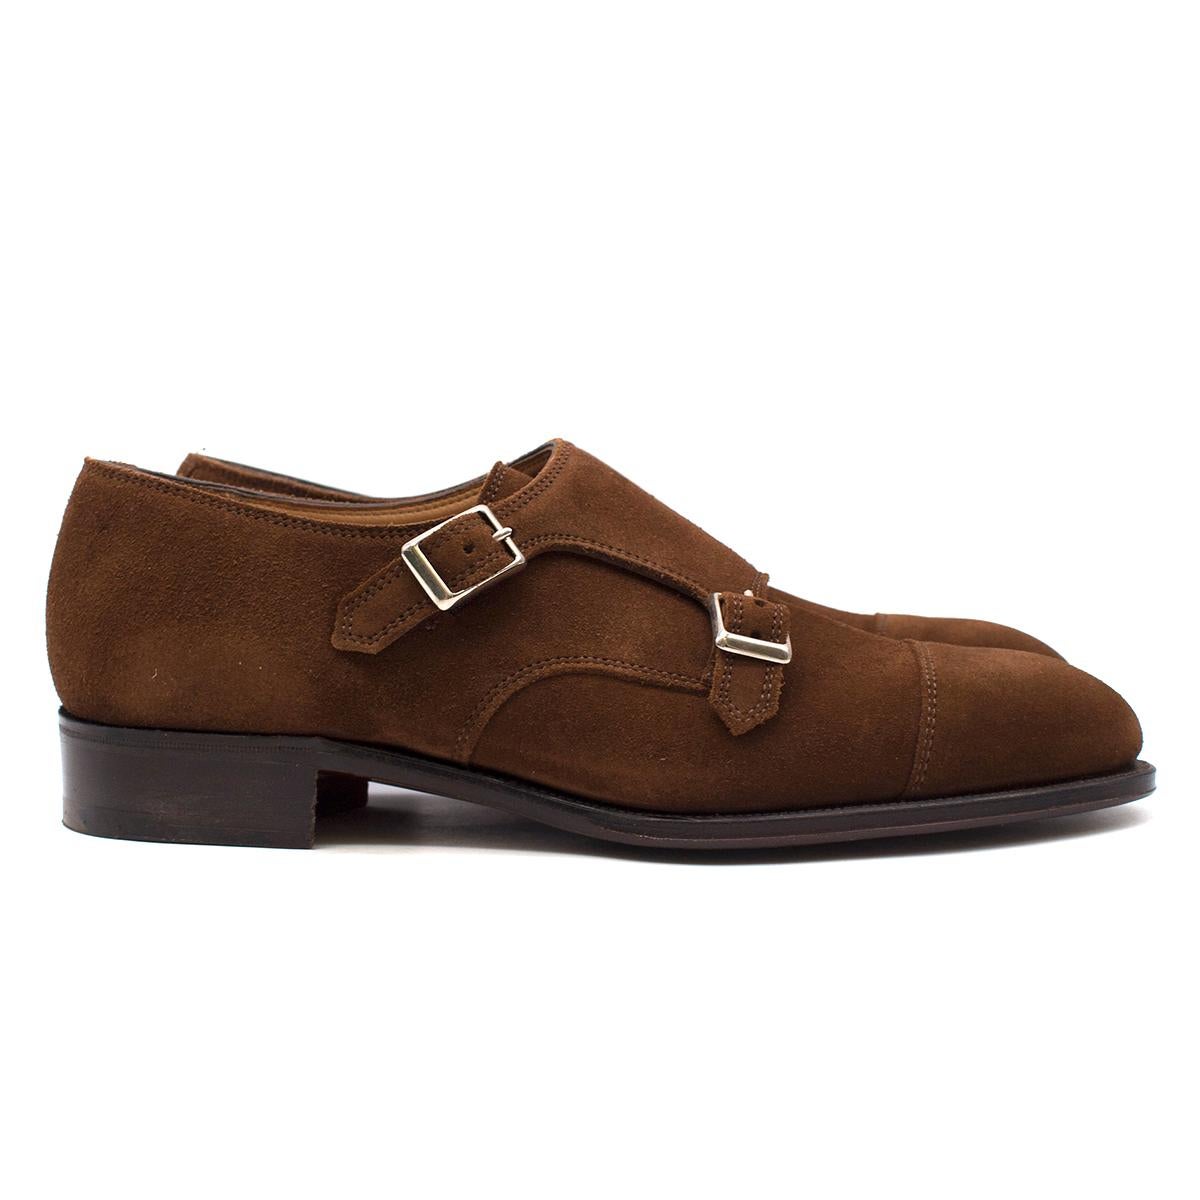 Hardy Amies London Dark Brown Suede Double Monk Shoes

- Dark brown suede monk shoes
- Double monk straps
- Smart round toe shape
- Nude leather lining with logo embroidered
- Leather soles
- Low heel
- This item comes with the original shoe